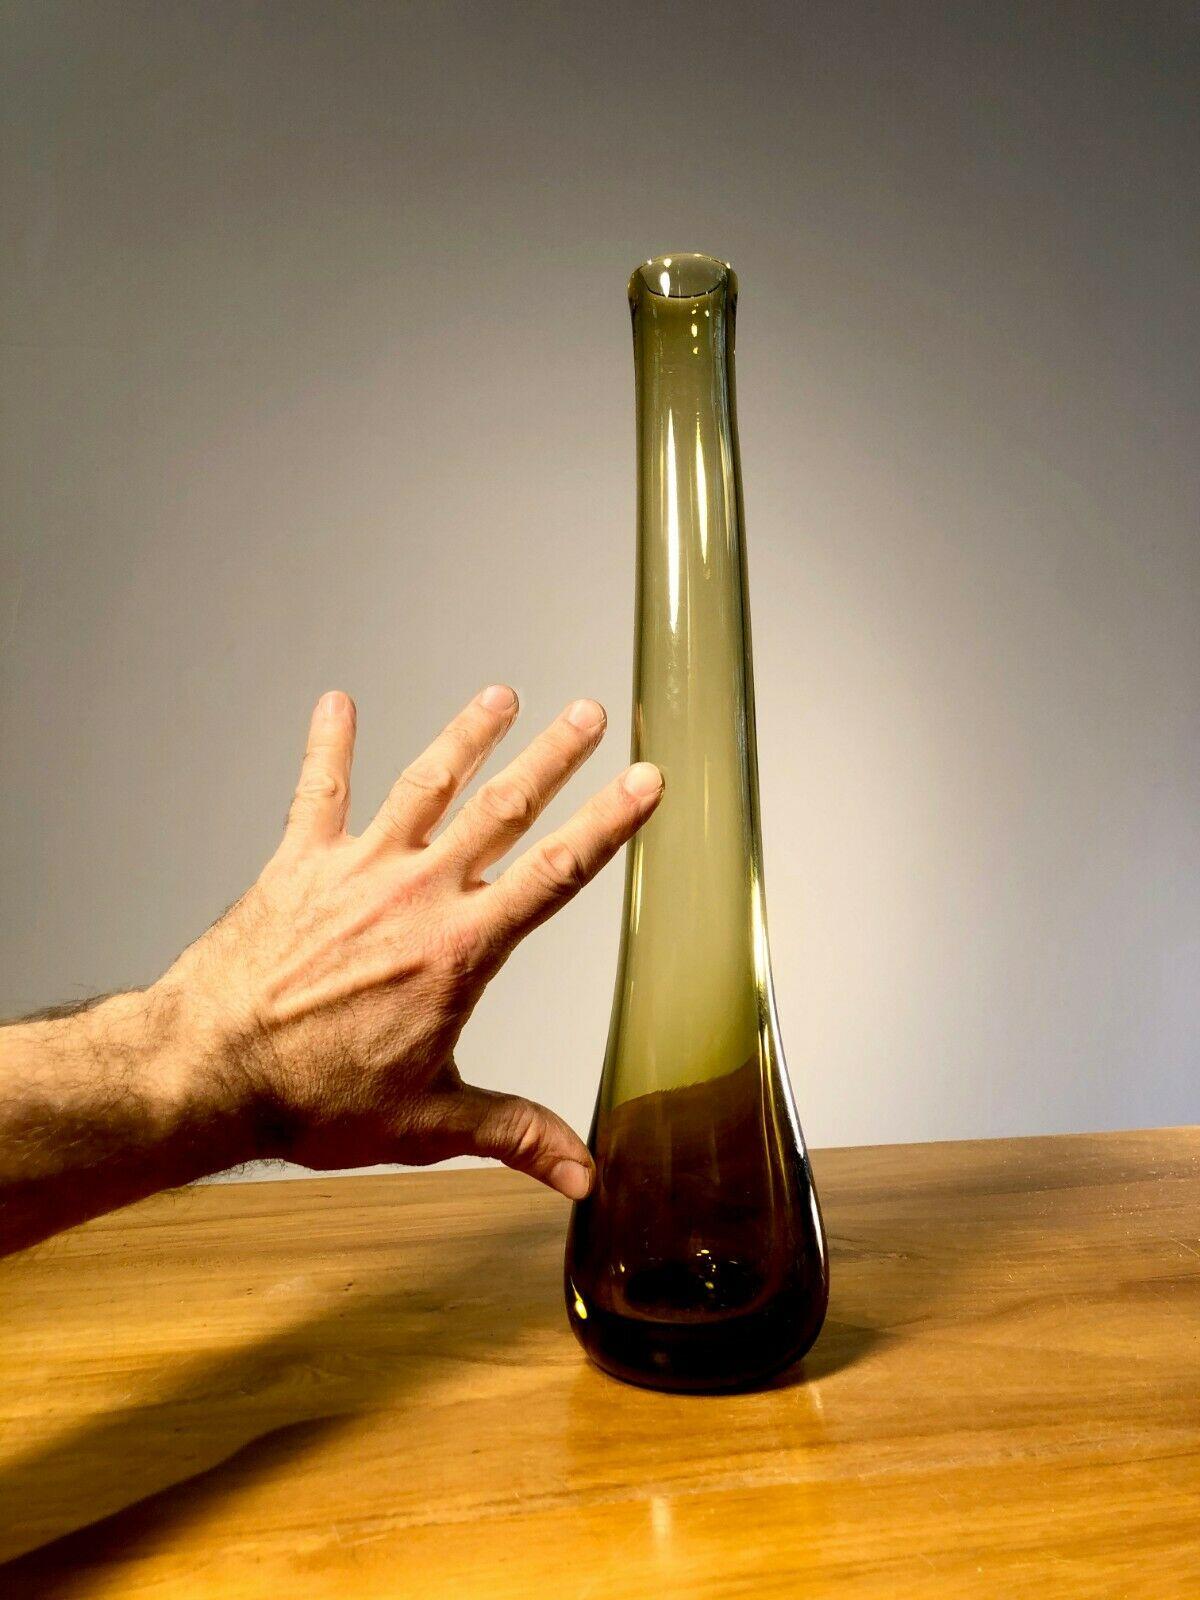 Blown Glass A MID-CENTURY-MODERN Blown GLASS VASE by CLAUDE MORIN, DIEULEFIT, France 1970 For Sale